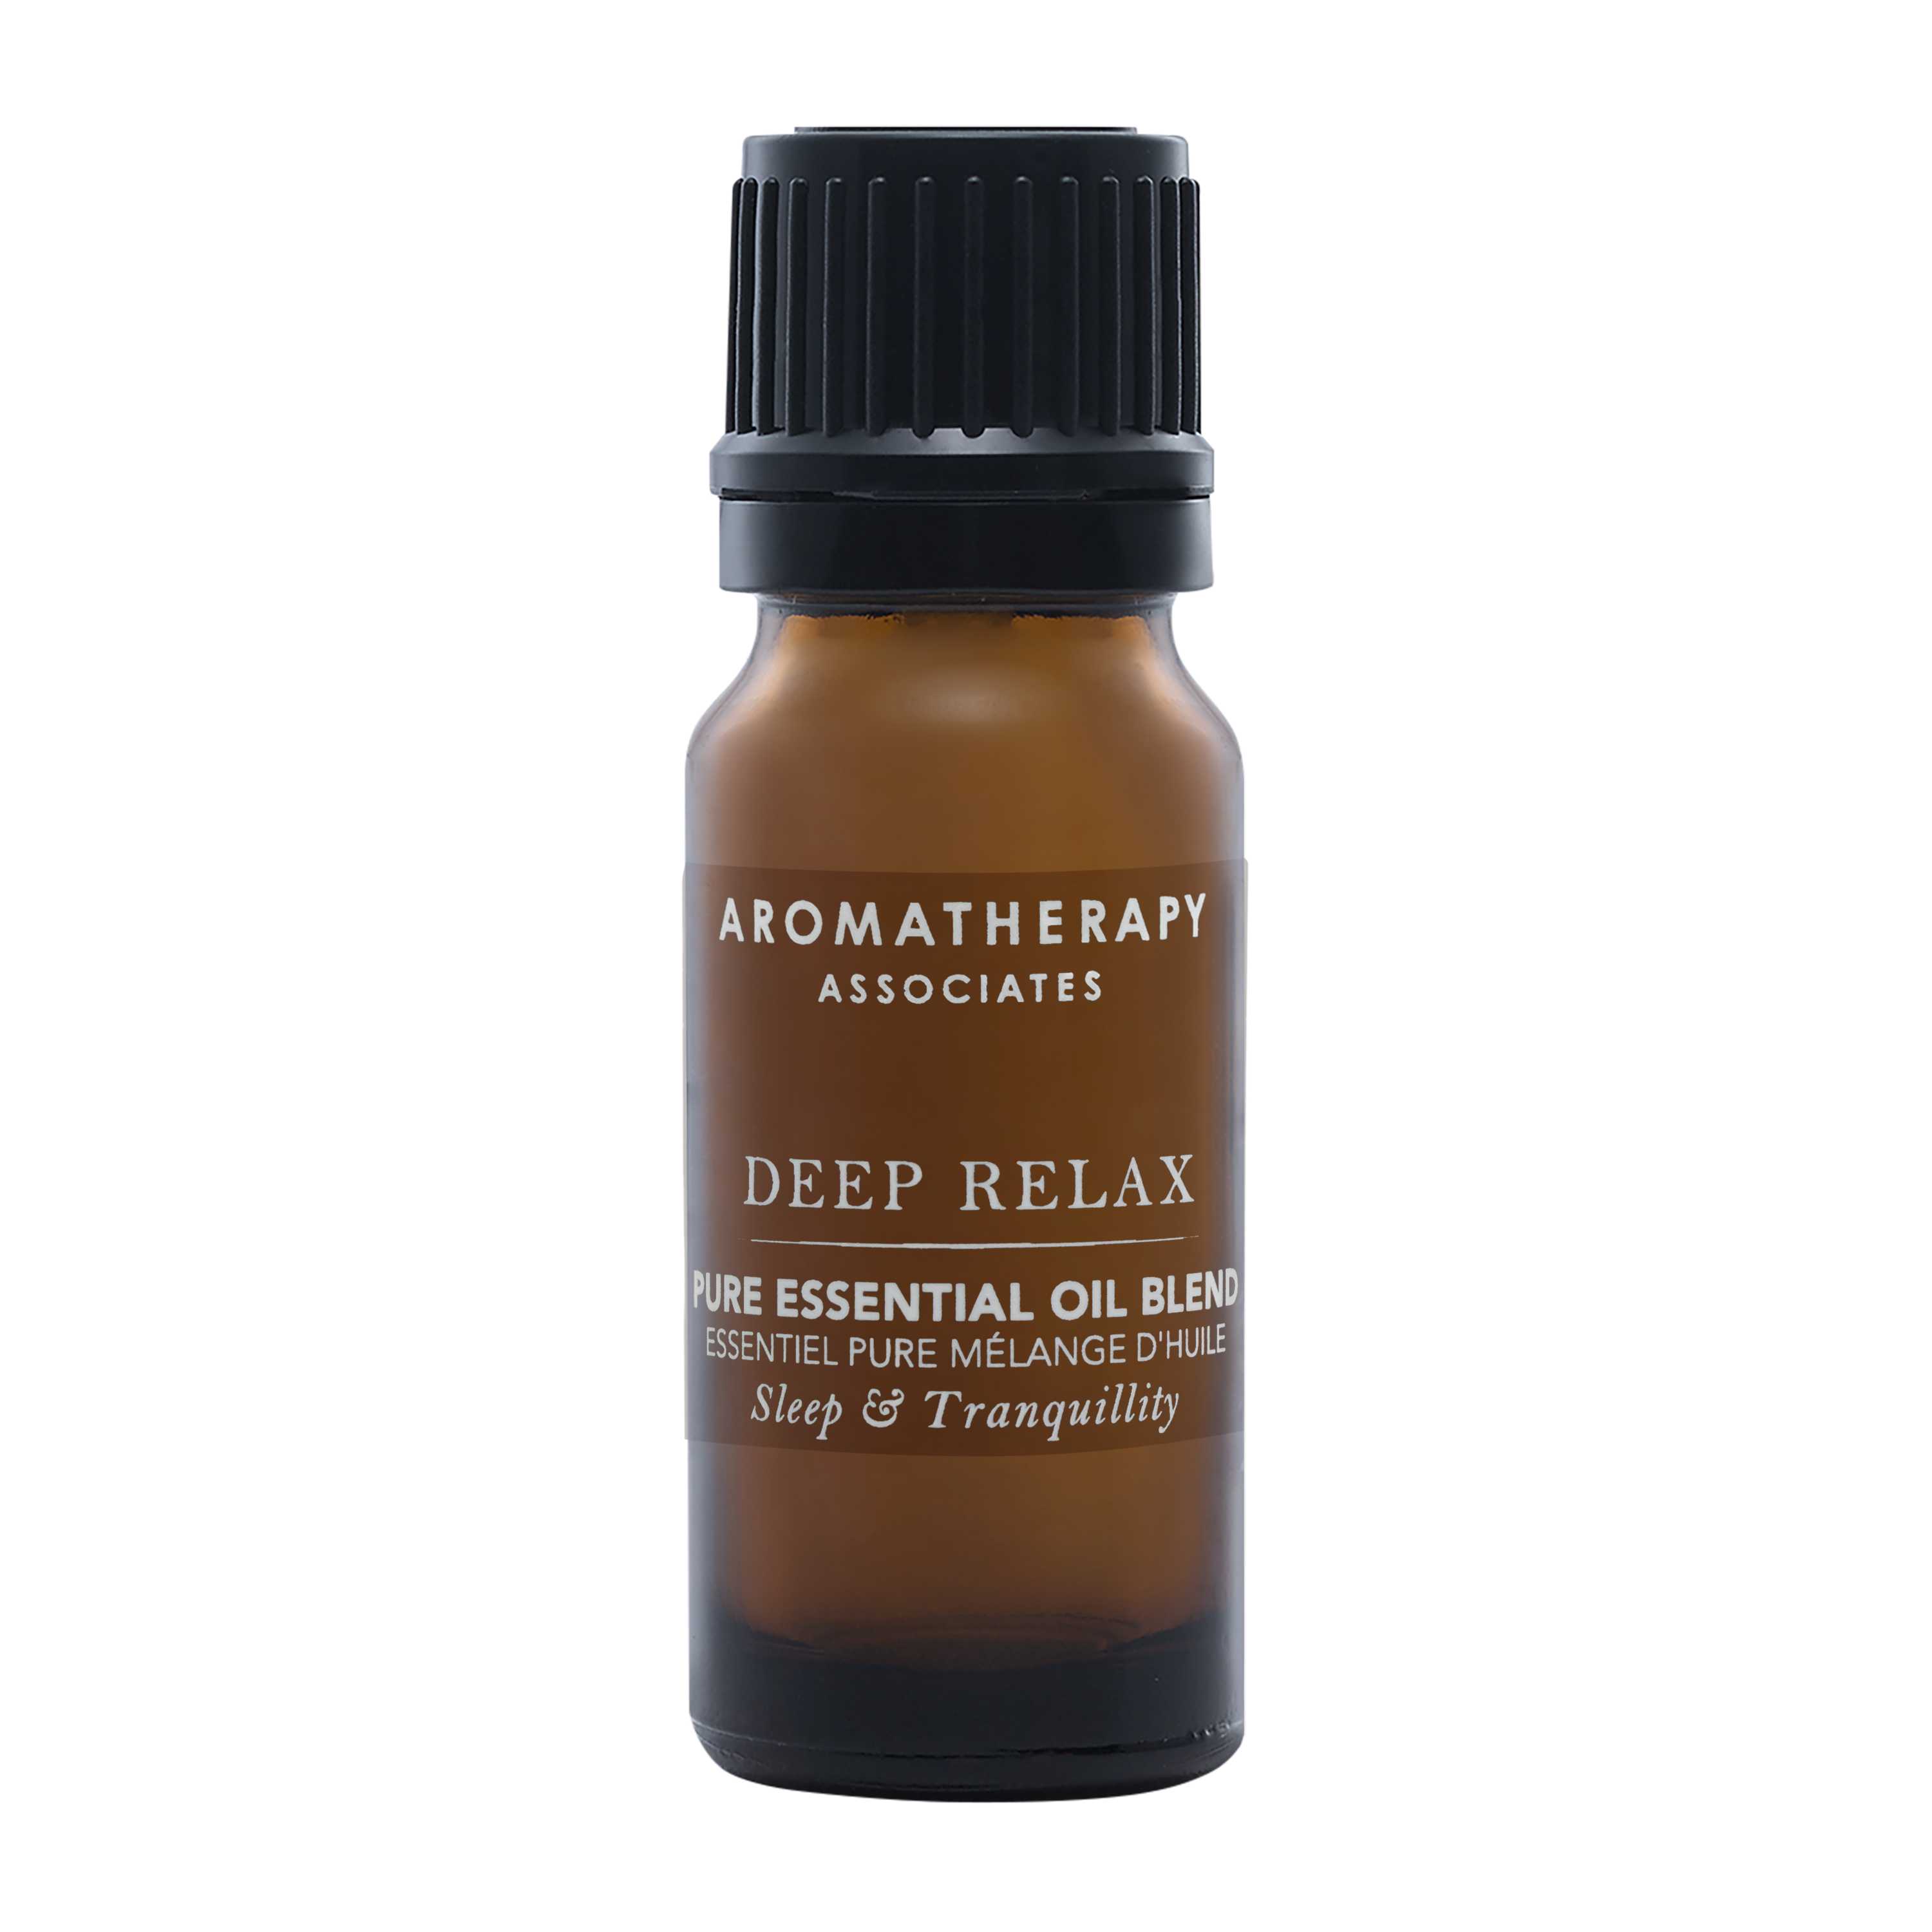 Deep Relax Pure Essential Oil Blend Aromatherapy Associates